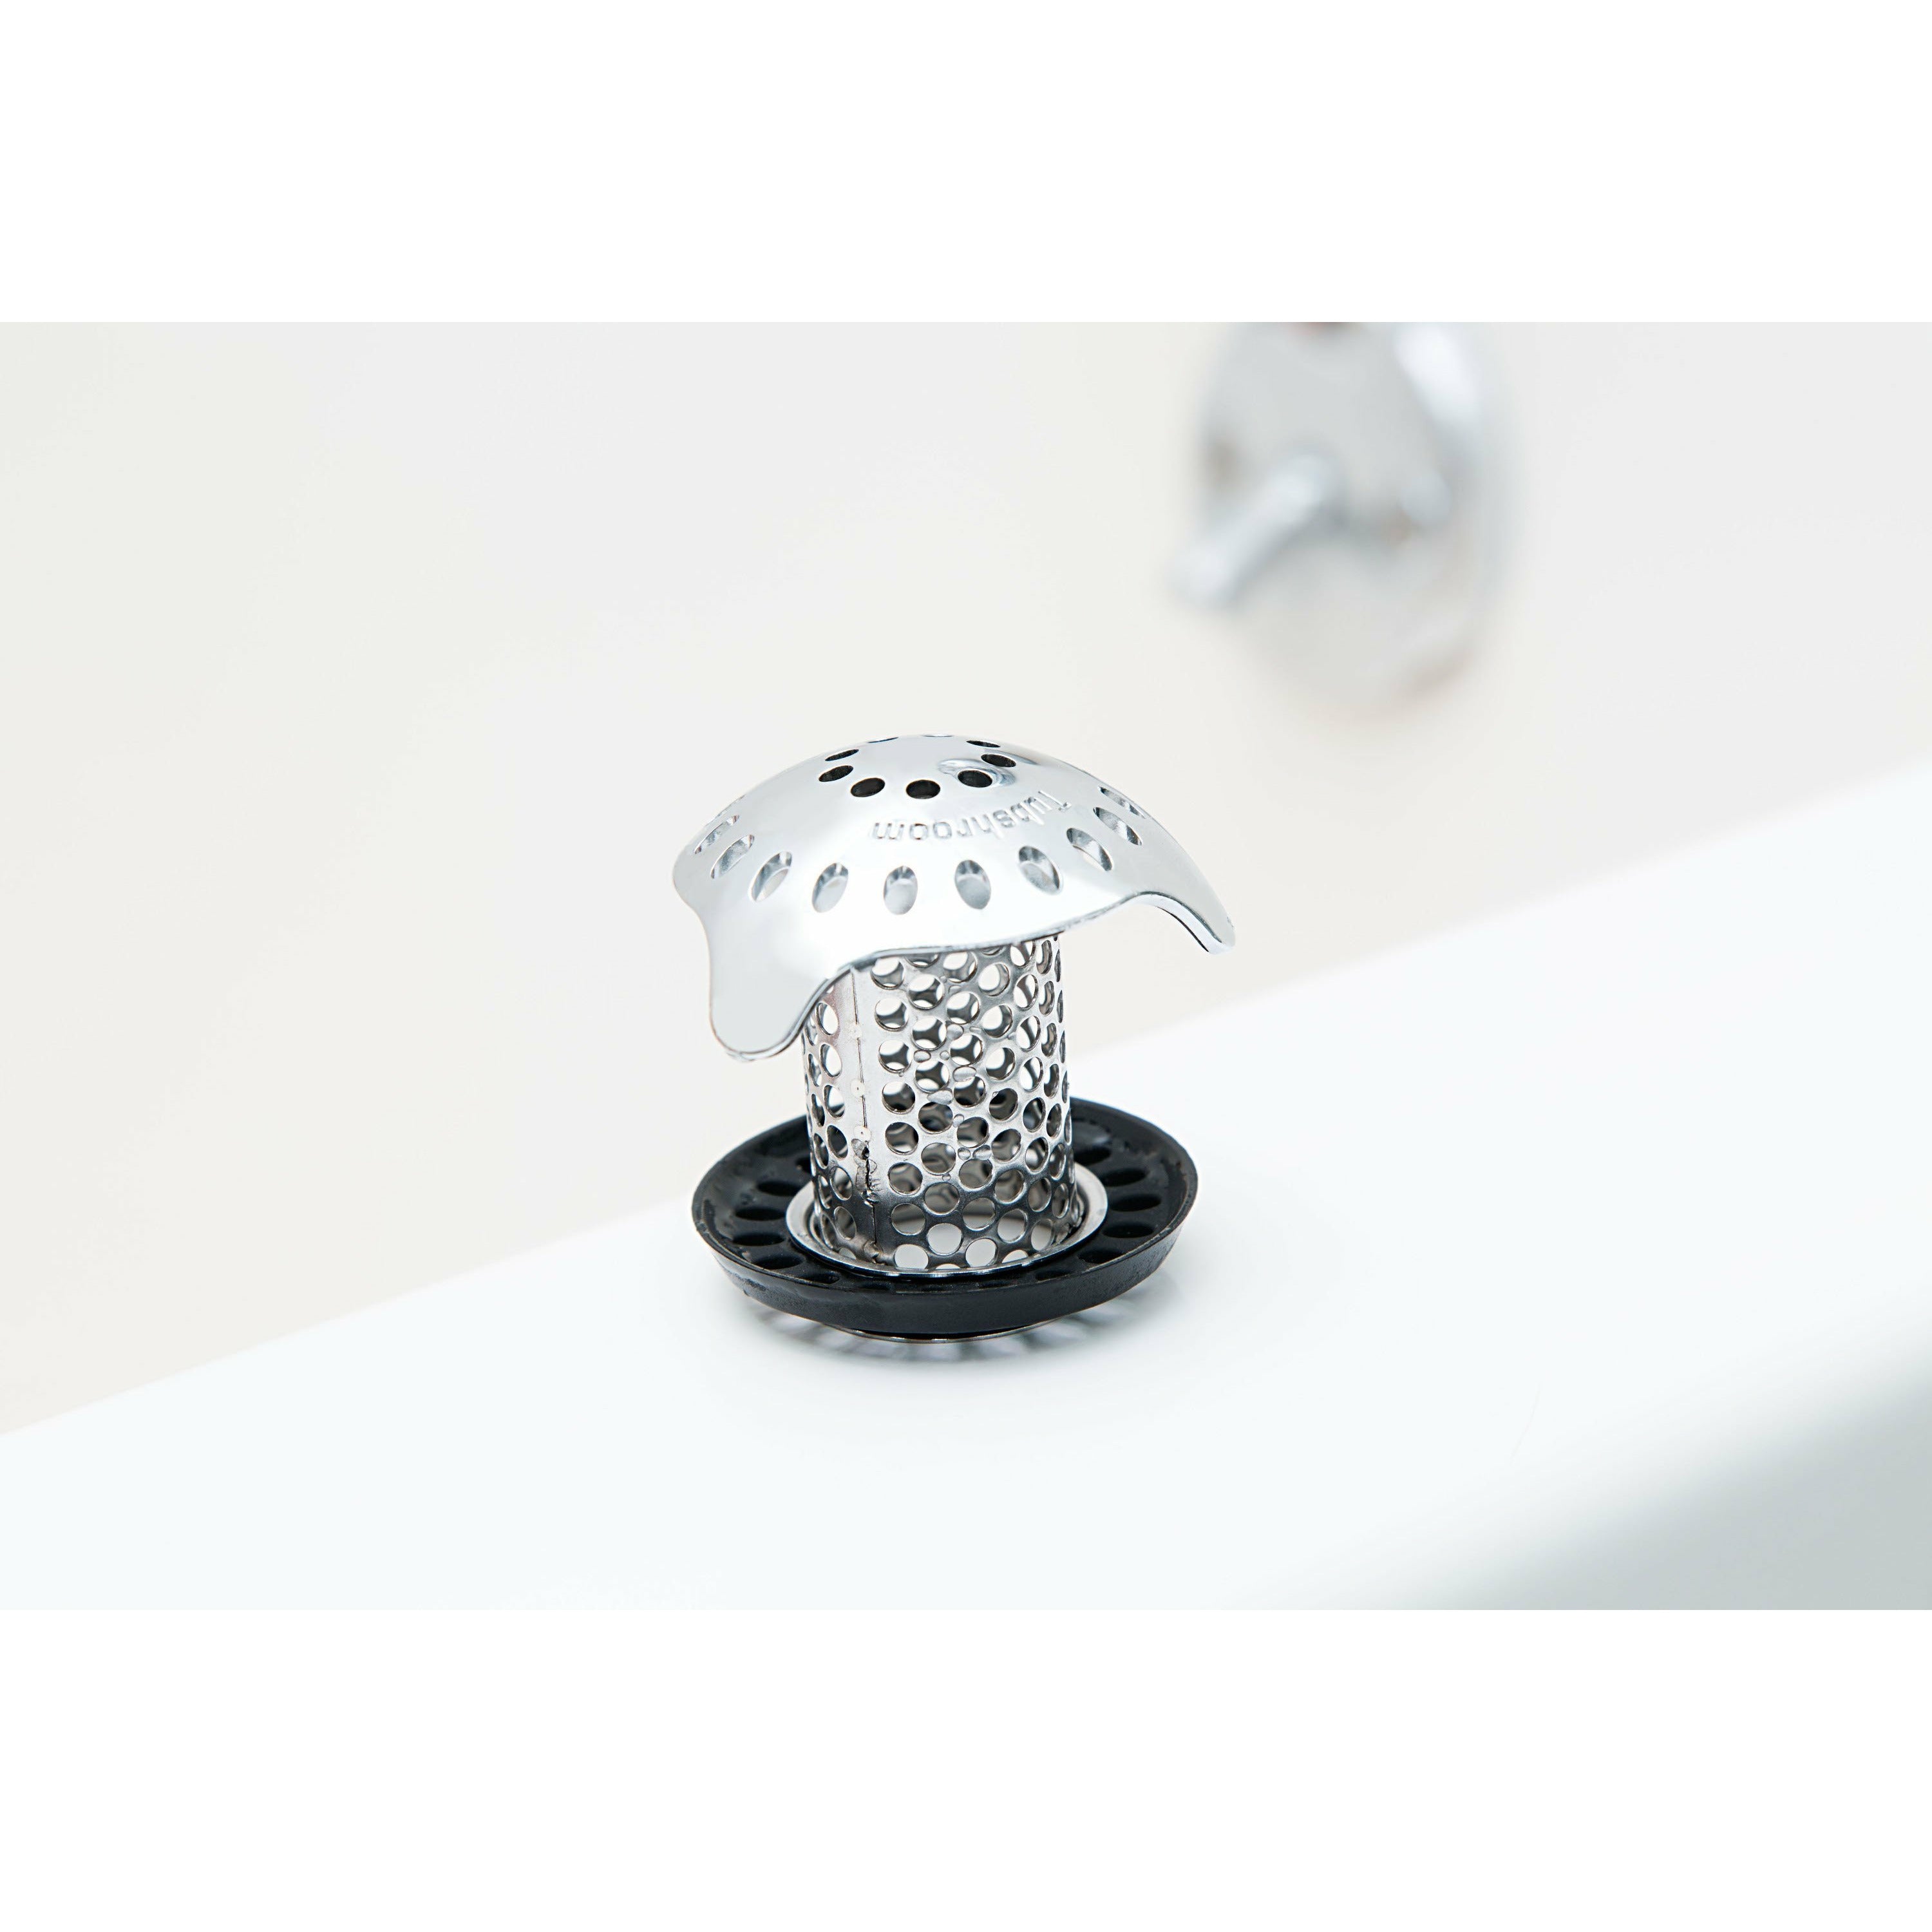 TubShroom Shower Strainer: Get Rid of Hair in Your Drain